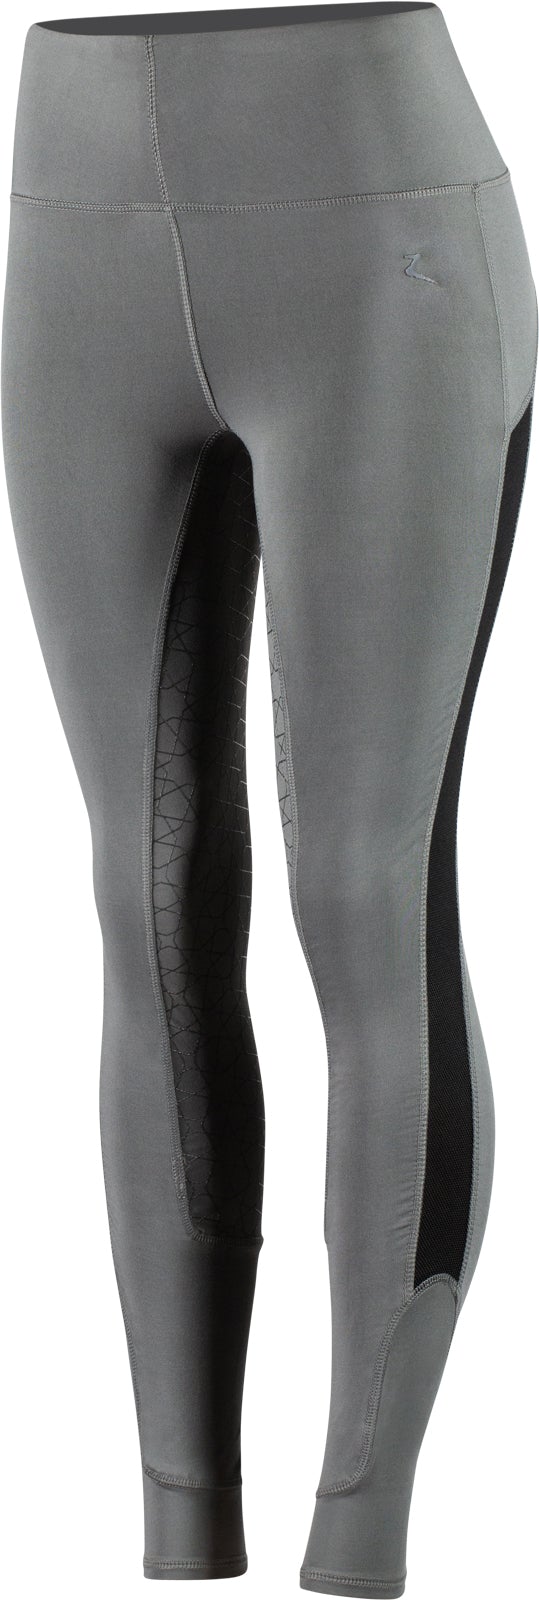 Front Grey Horze Betty Women's Full Seat Tights with Mesh Inserts Full Seat Tights